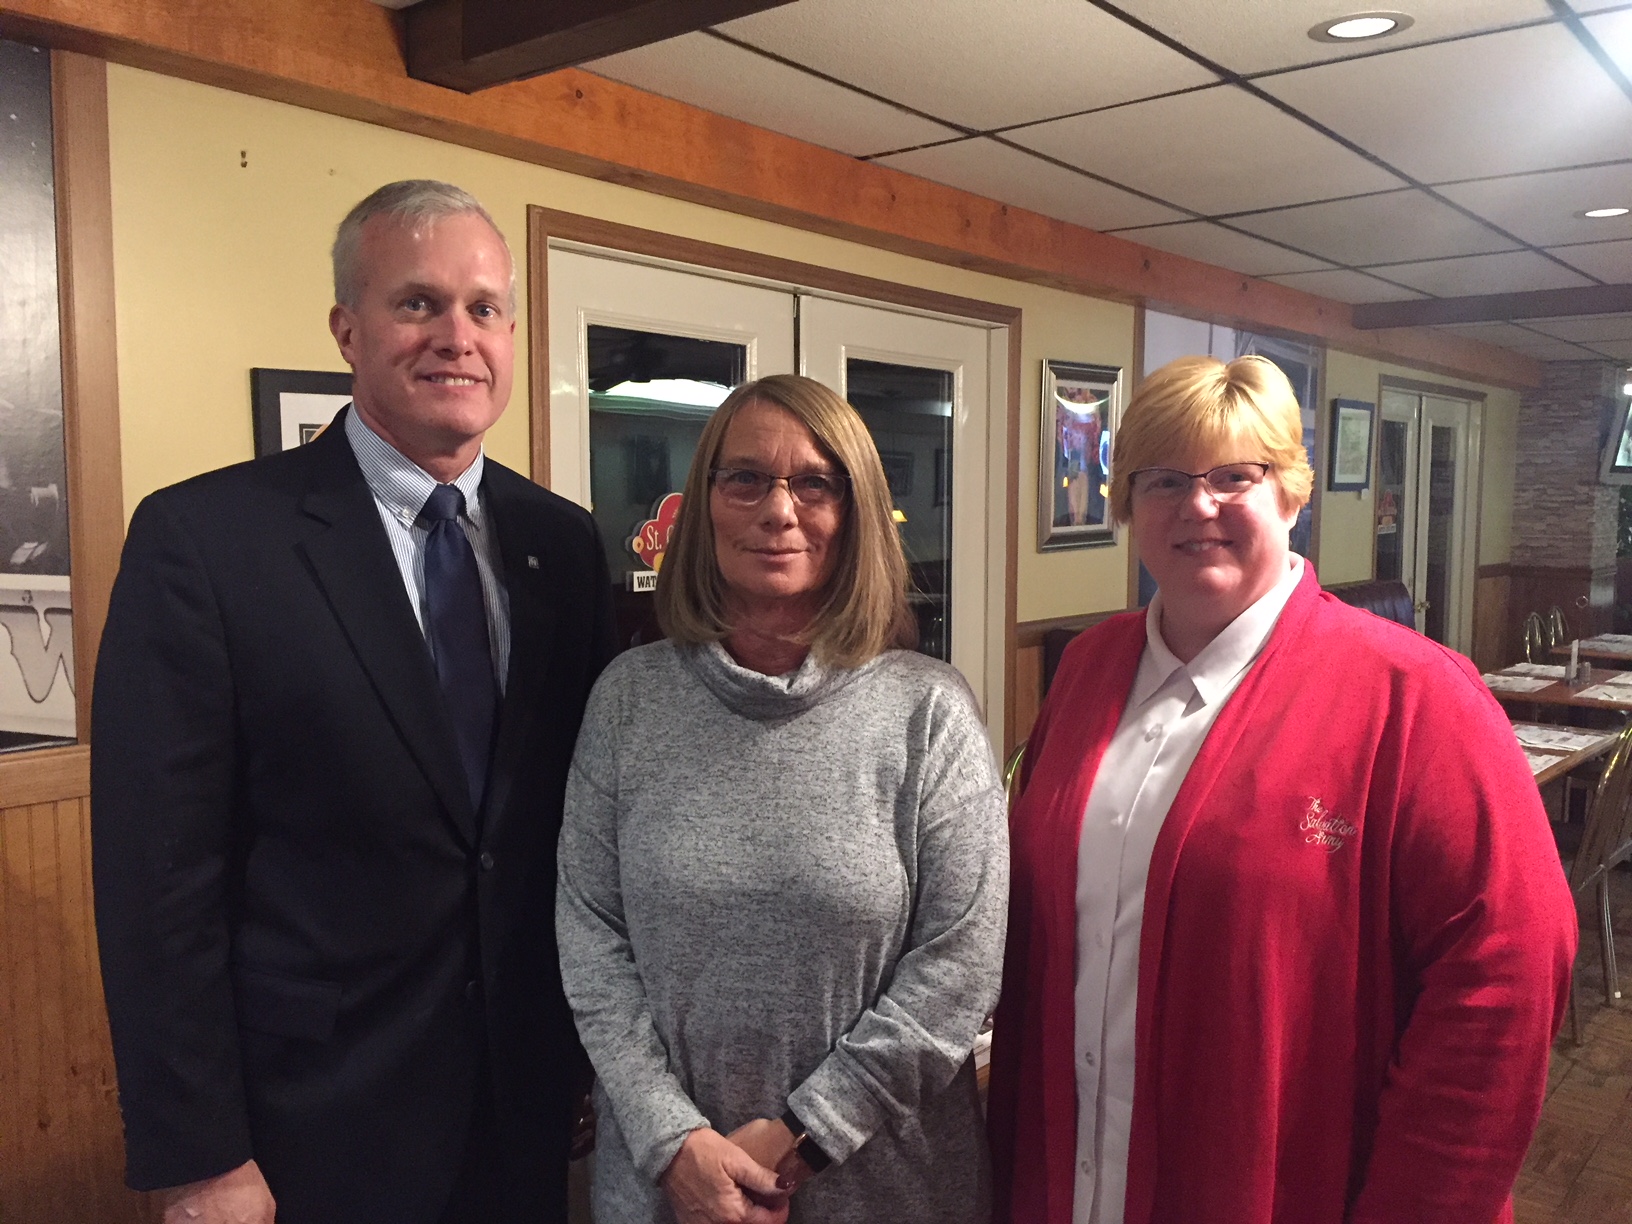 Shown are Michael Ryan, CAUW campaign team volunteer; Captain Laurie Greenfield of The Salvation Army, Clearfield; and Sue Rumfola, CAUW board member volunteer. (Provided photo)